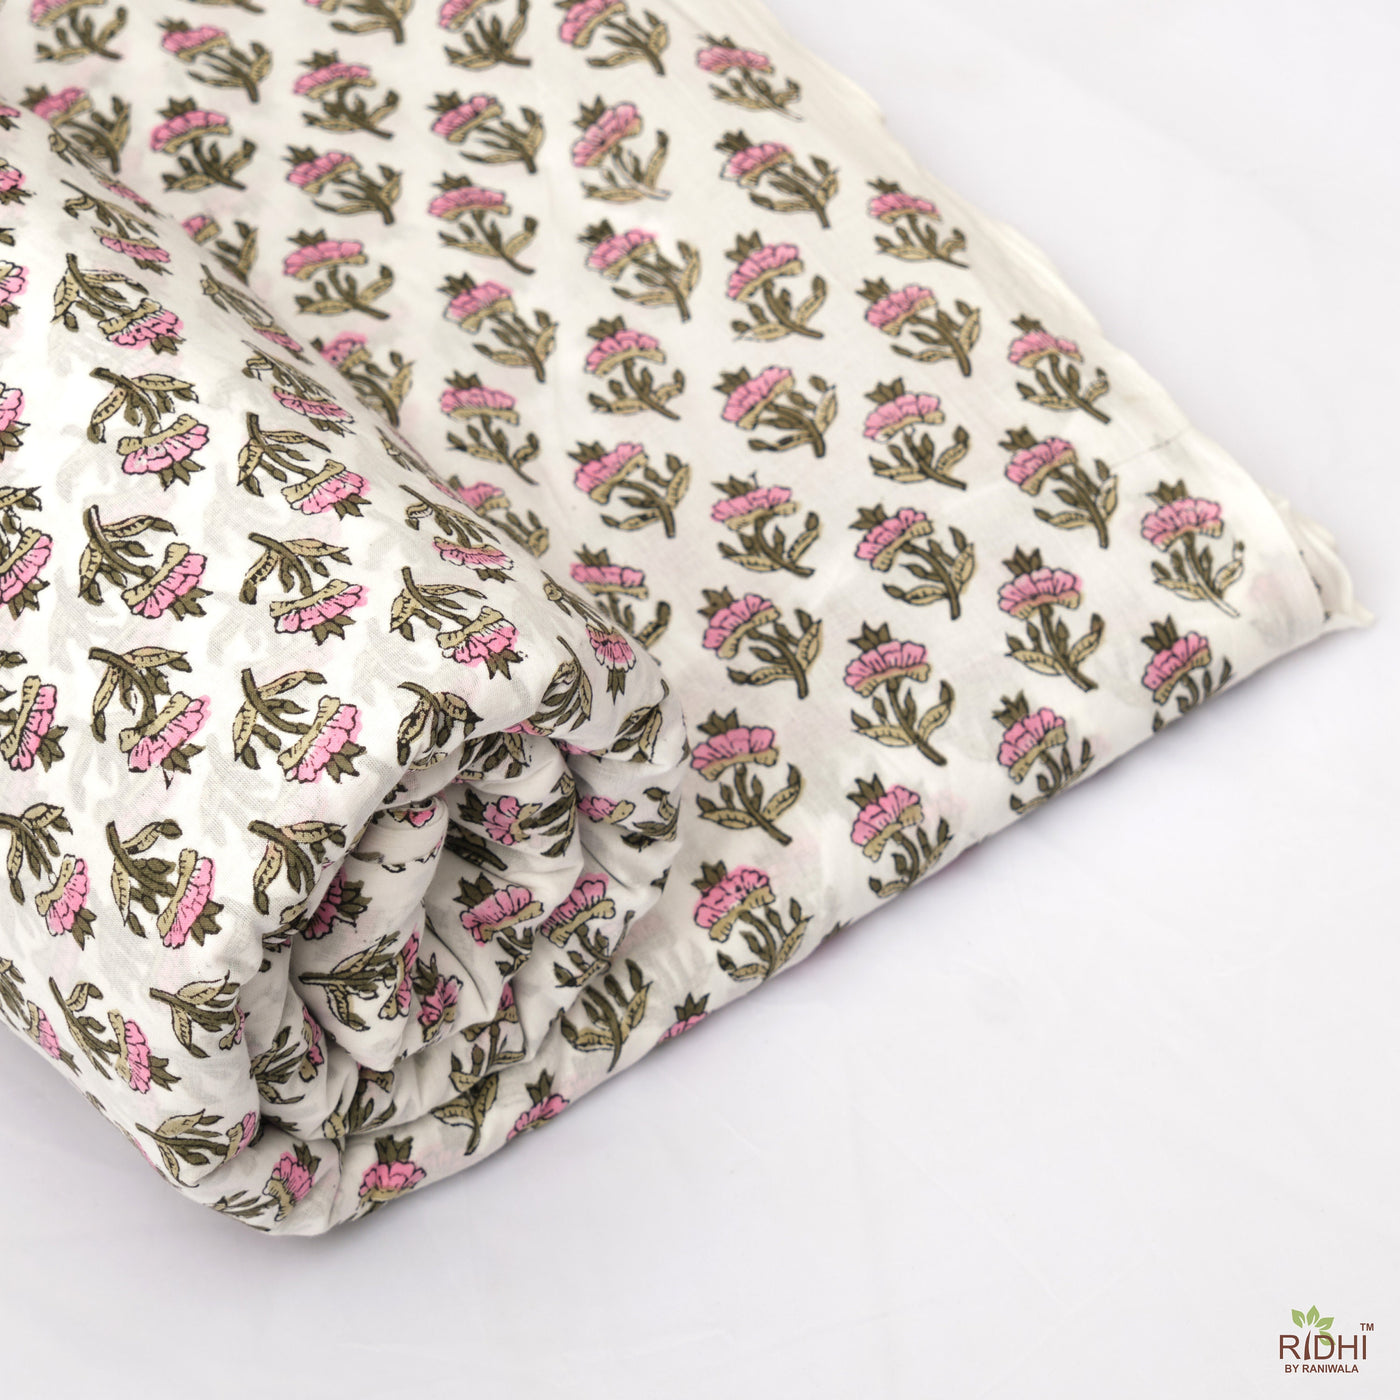 Taffy Pink, Asparagus and Army Green Indian Hand Block Printed 100% Pure Cotton Cloth, Fabric by the yard, Fabric for Women's Clothing Bags